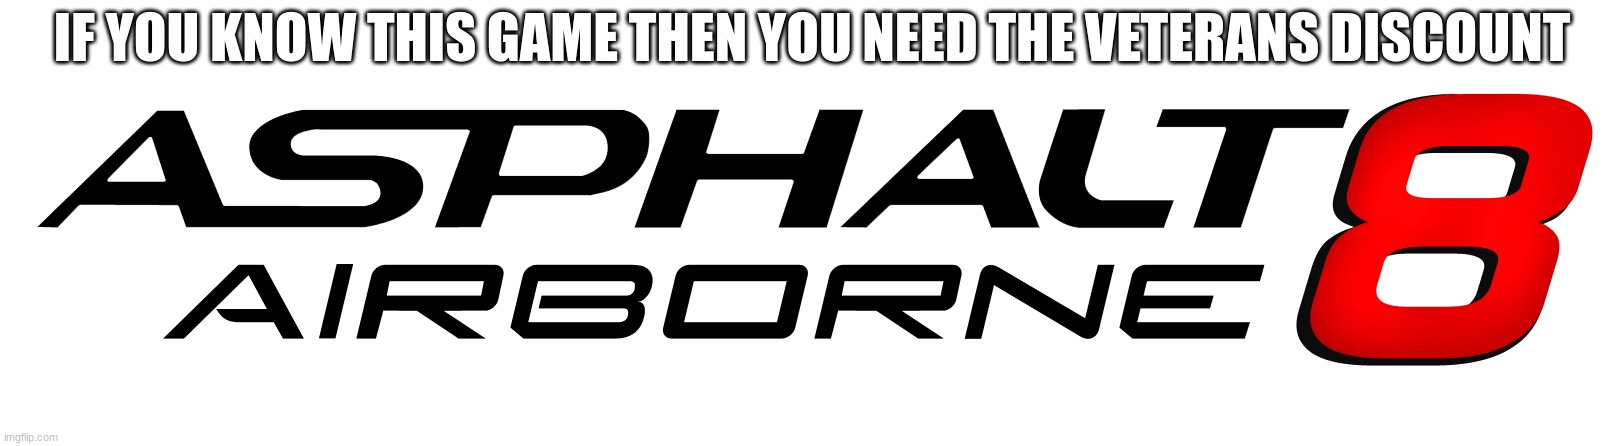 asphalt is still the best car game imo | IF YOU KNOW THIS GAME THEN YOU NEED THE VETERANS DISCOUNT | image tagged in asphalt 8 airborne,nostalgia,oh wow are you actually reading these tags | made w/ Imgflip meme maker